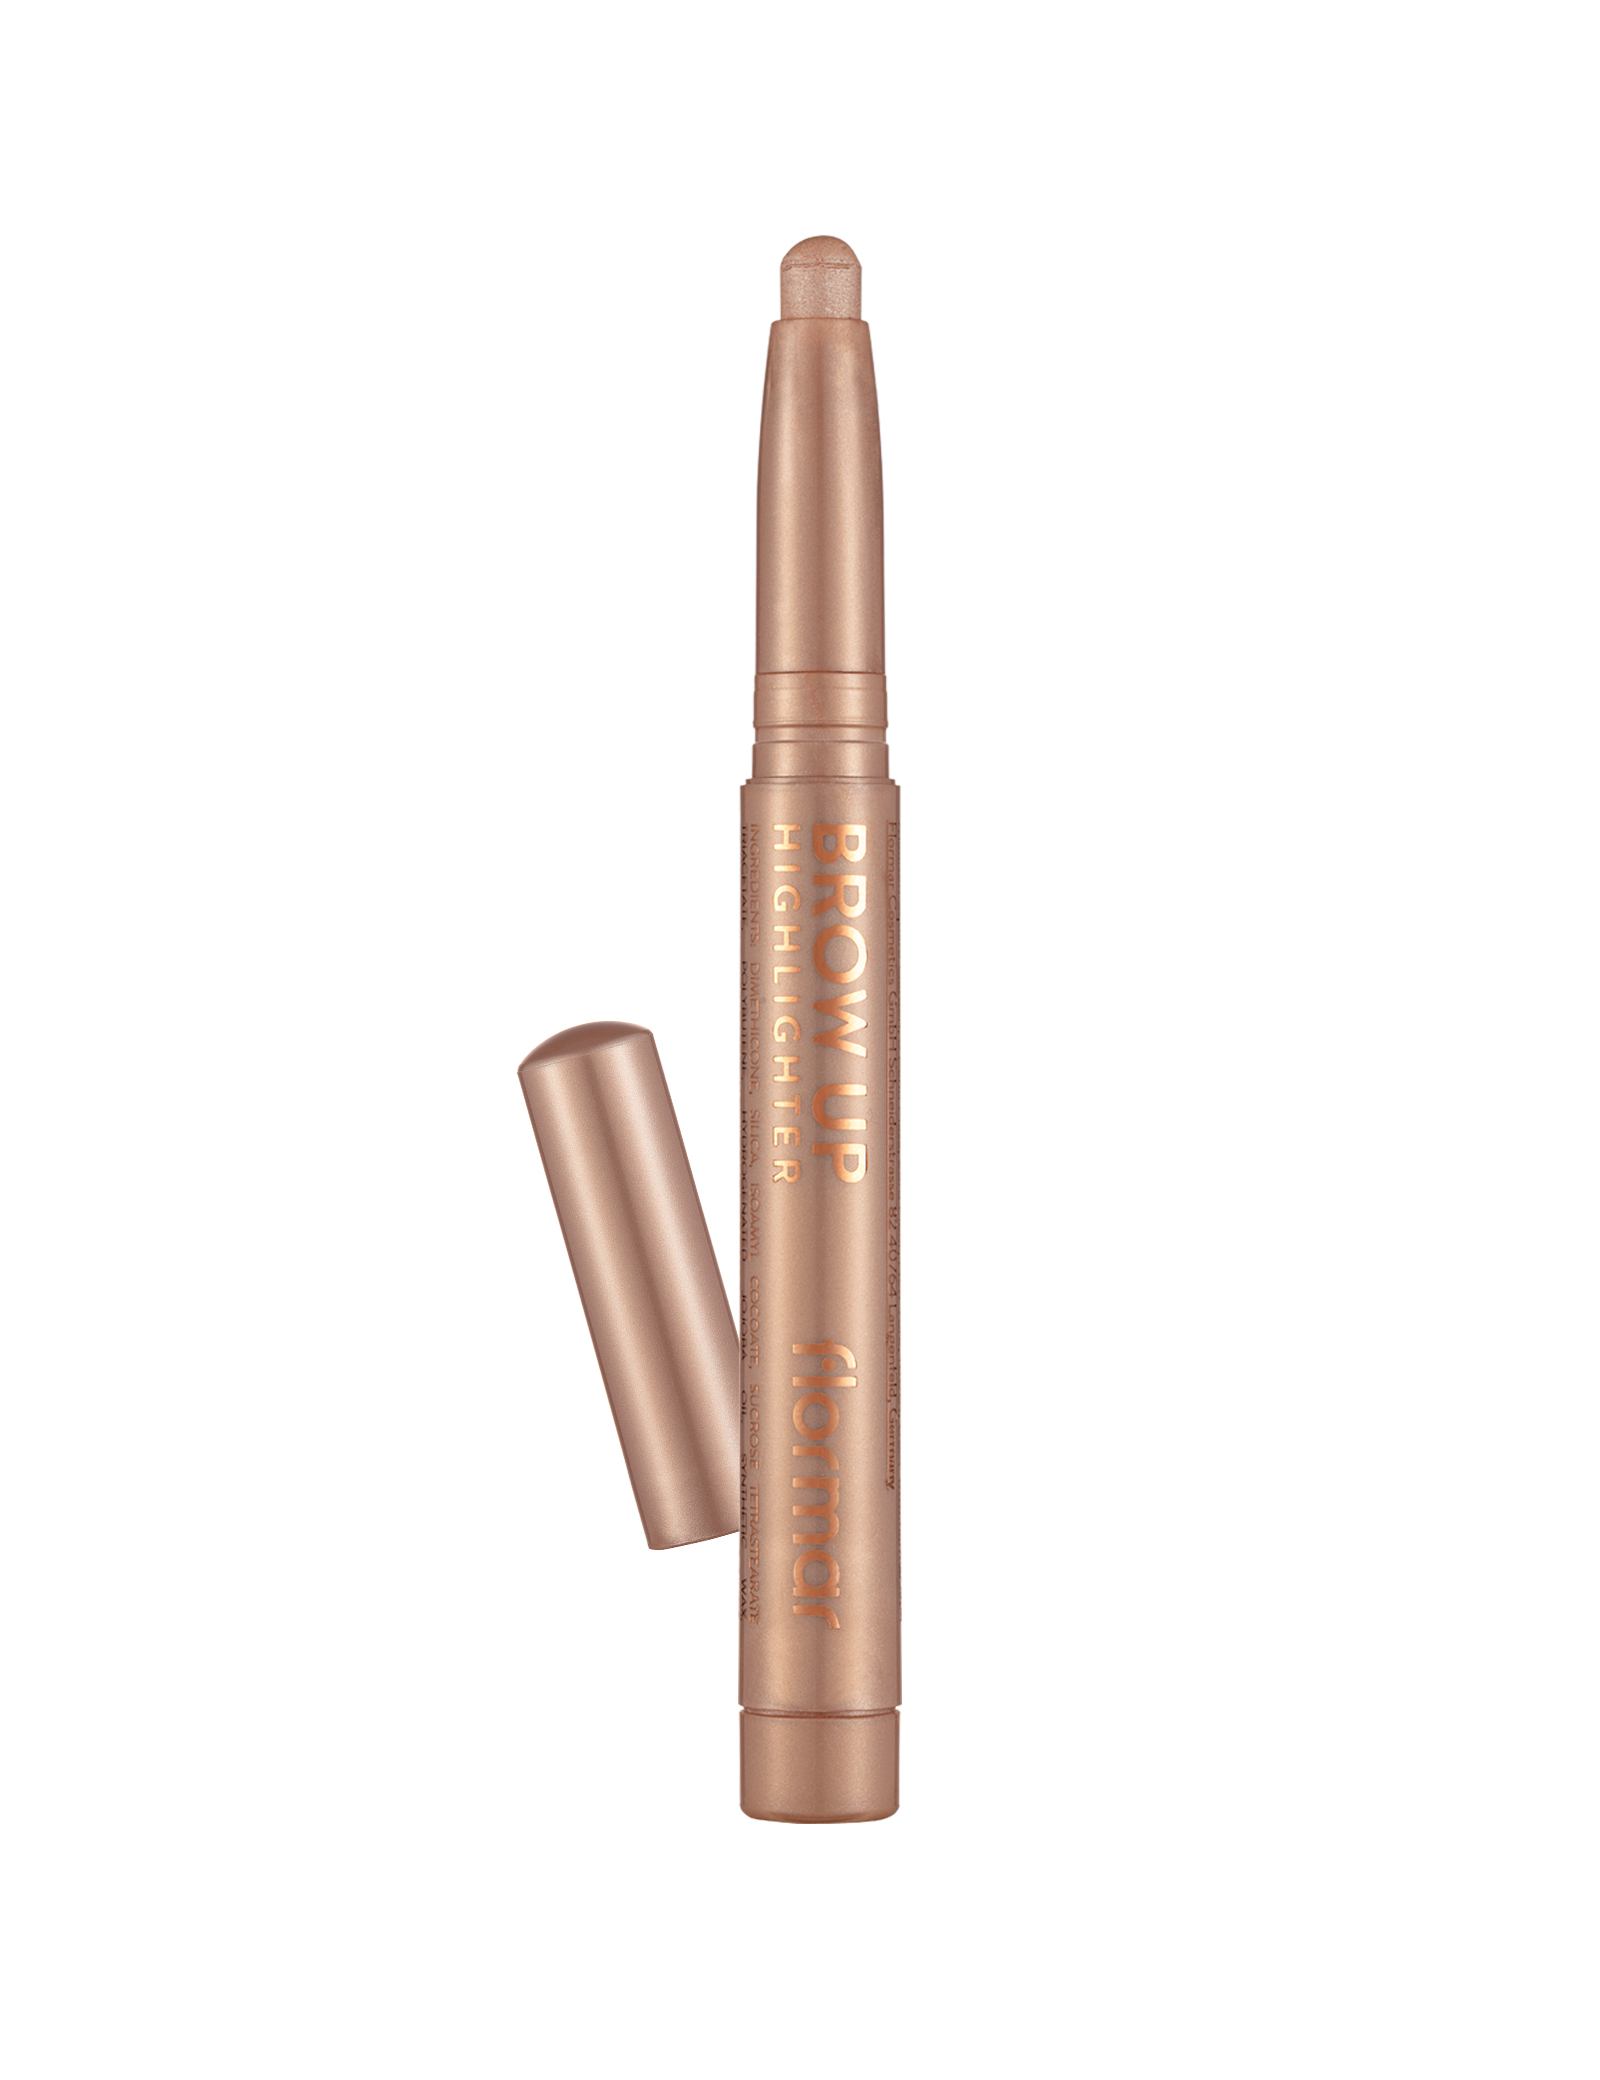 Eyebrow Highlighter - Champagne from Flormar